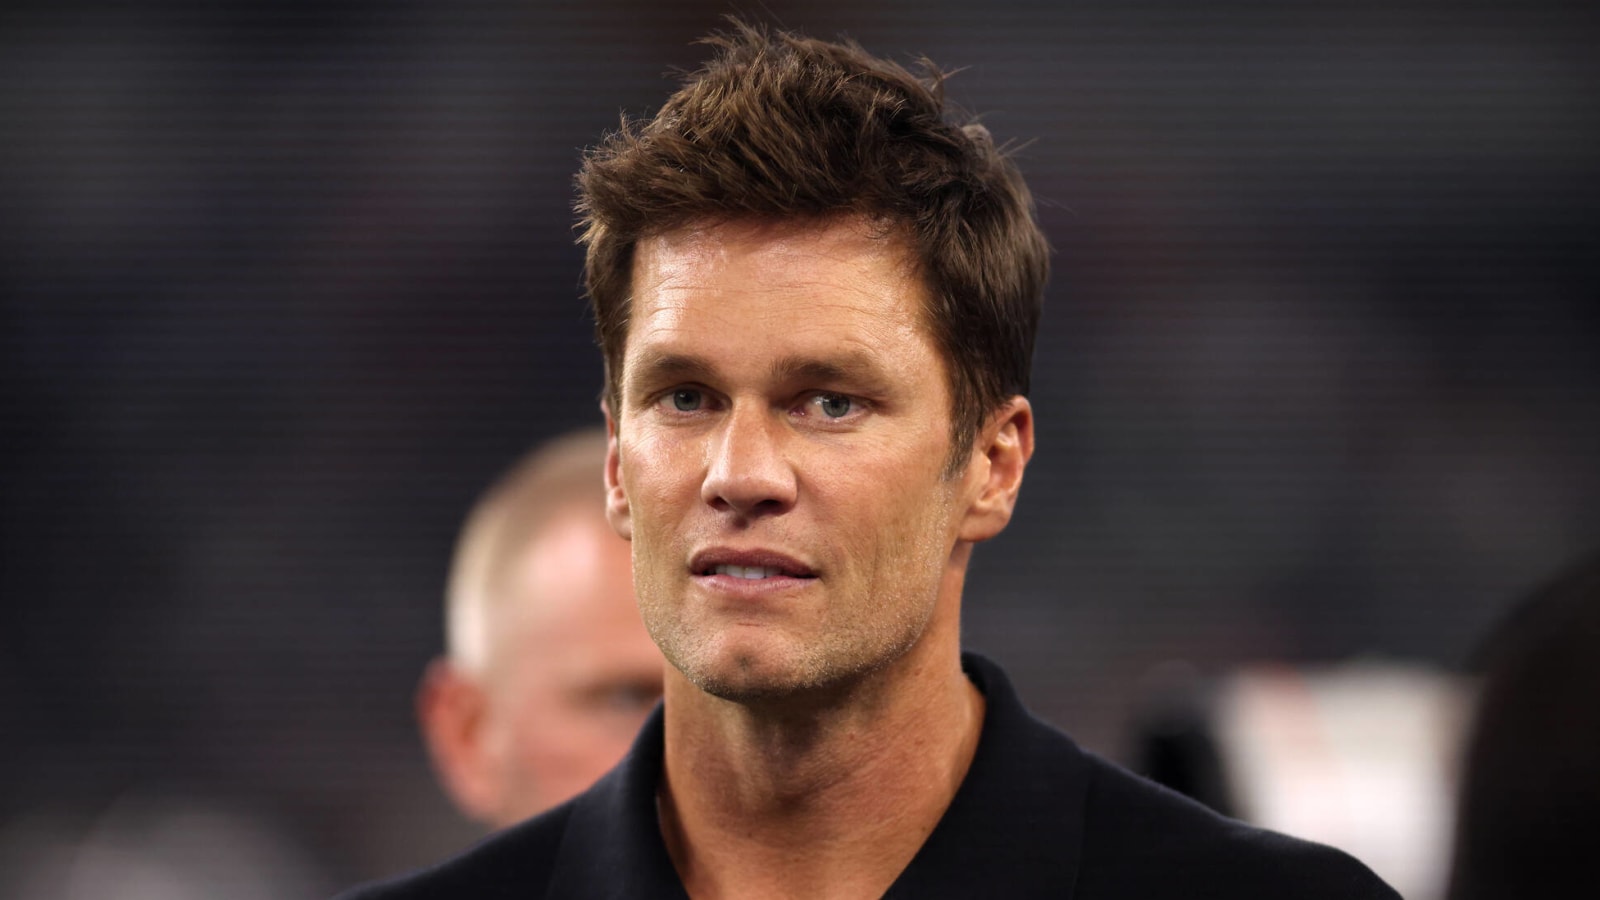 Tom Brady weighs in on Bill Belichick's struggles with Patriots